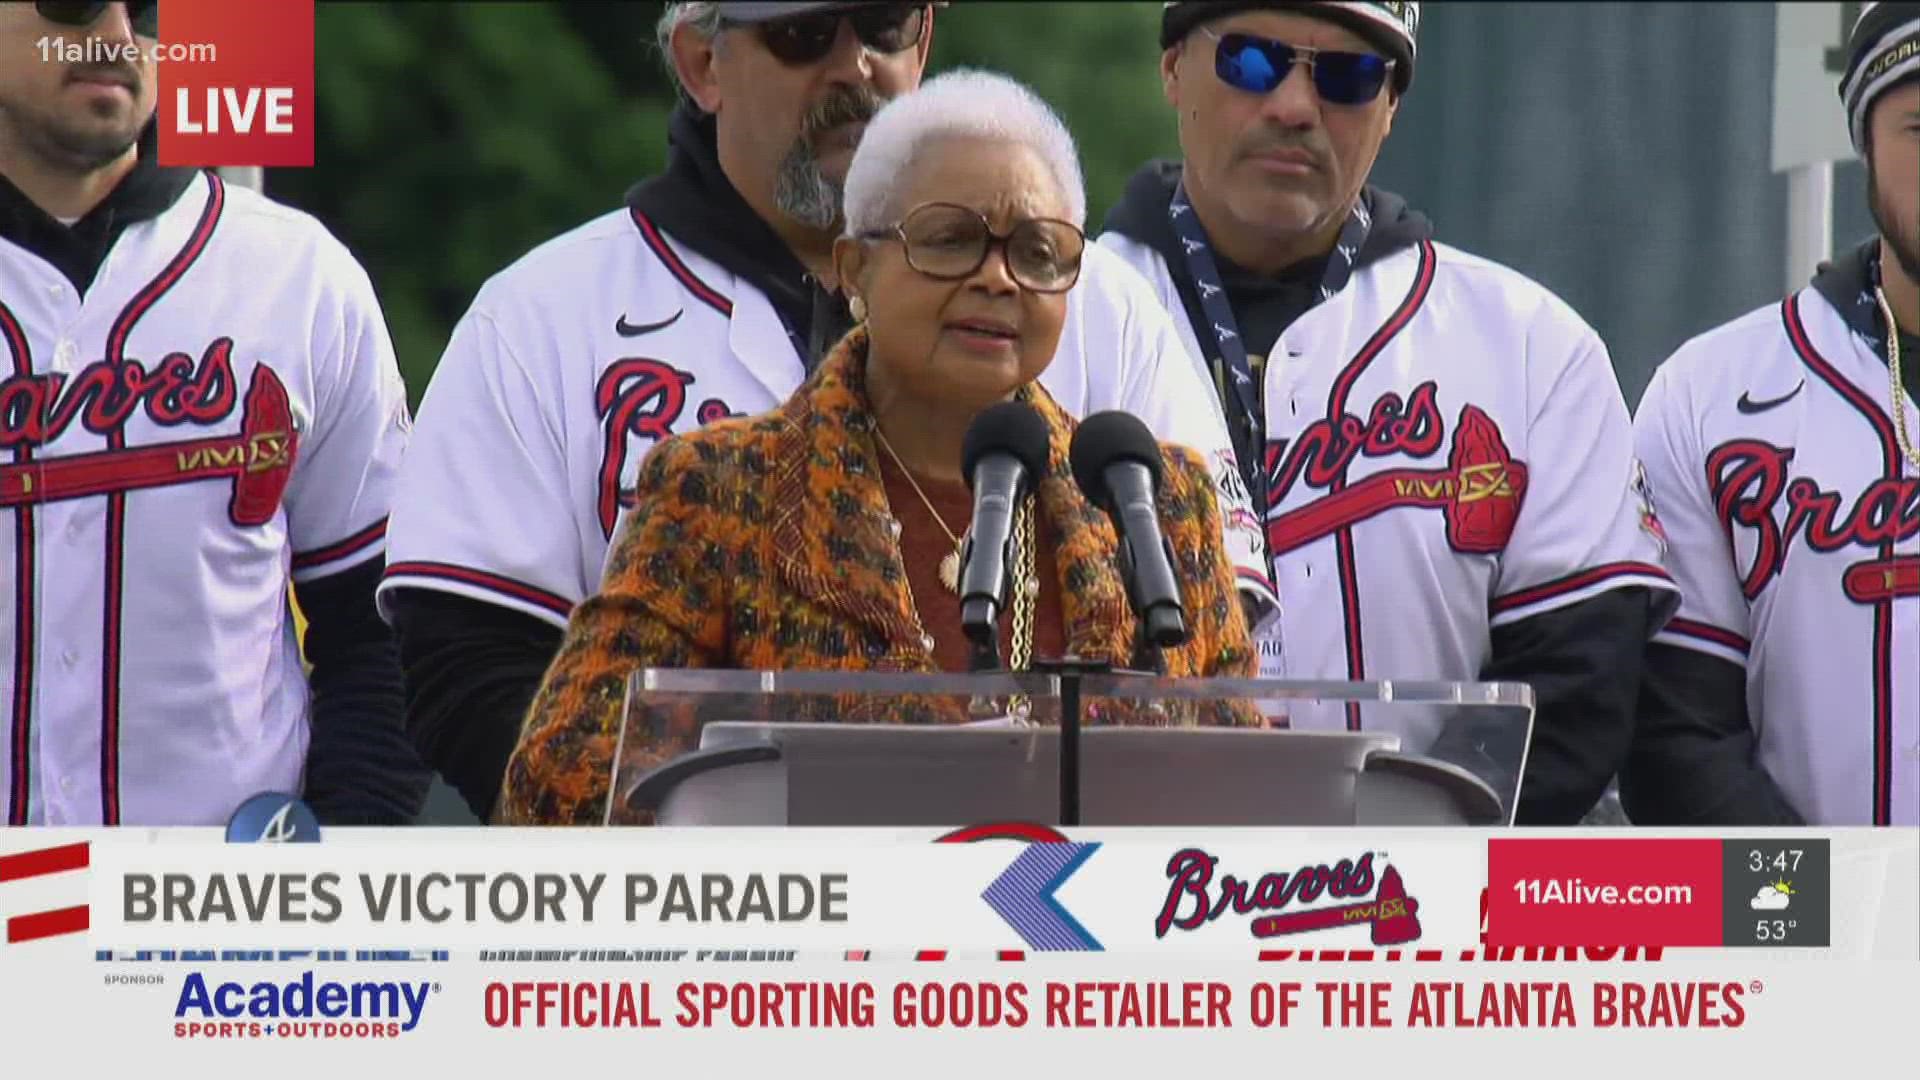 She thanked the crowd for the support they've given the Atlanta Braves over the years.